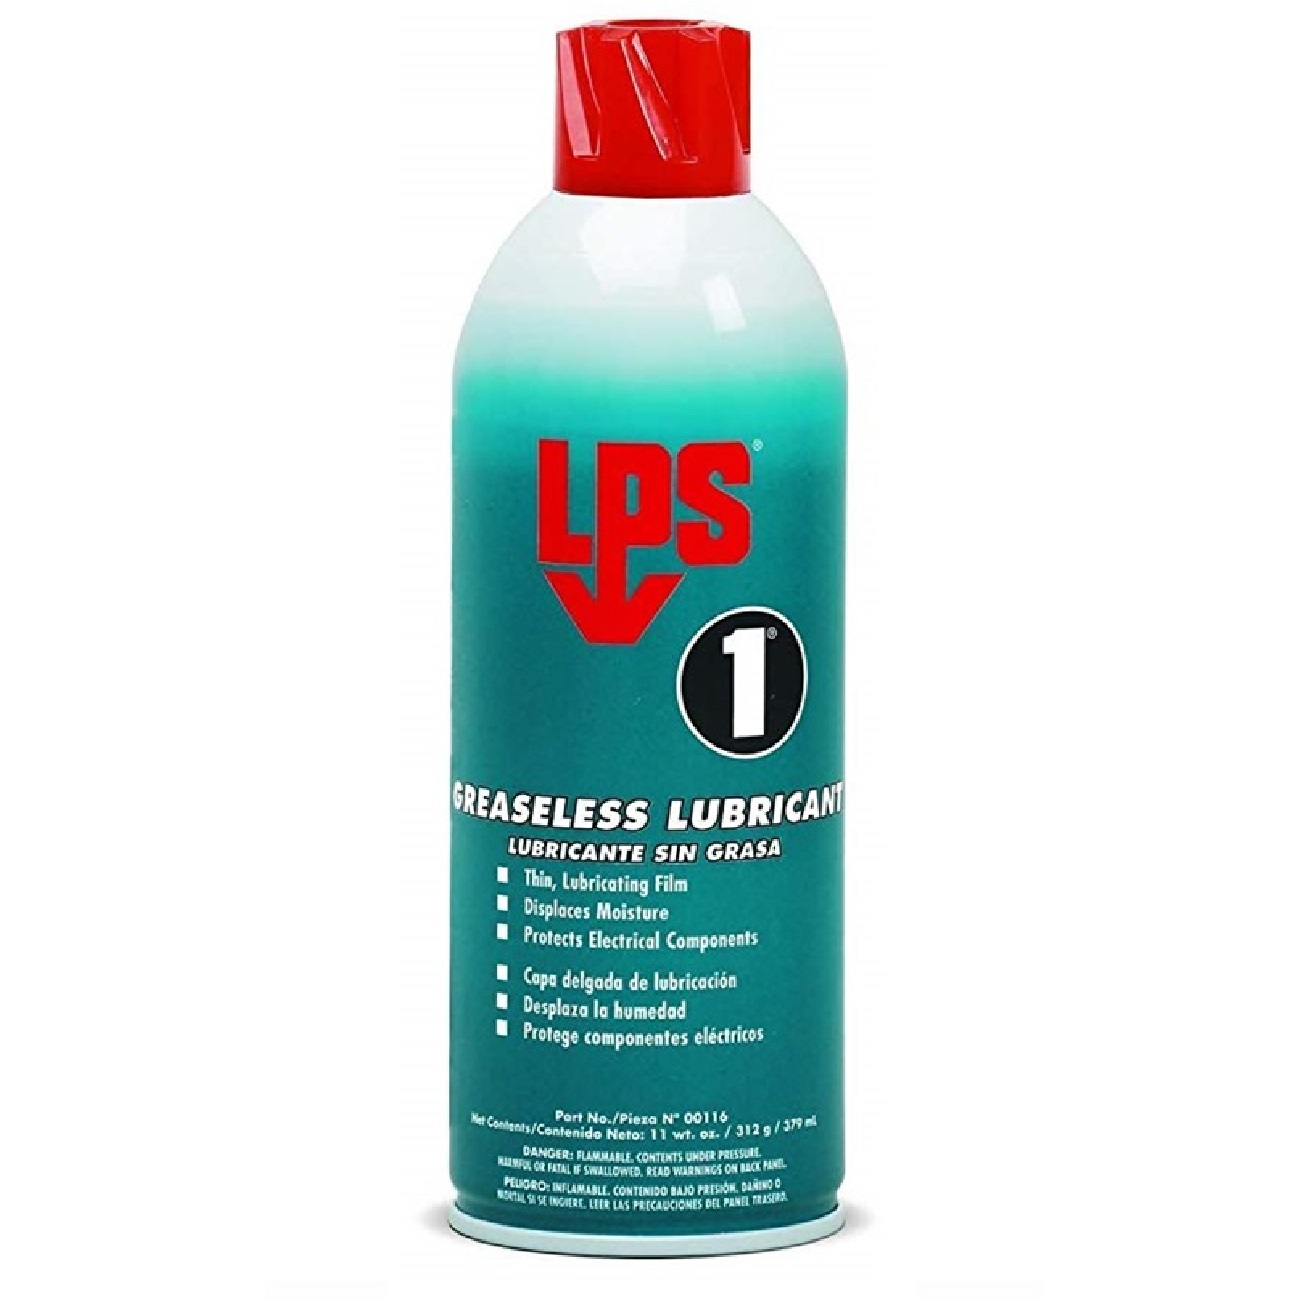 LPS 1 Greaseless Lubricant 11oz